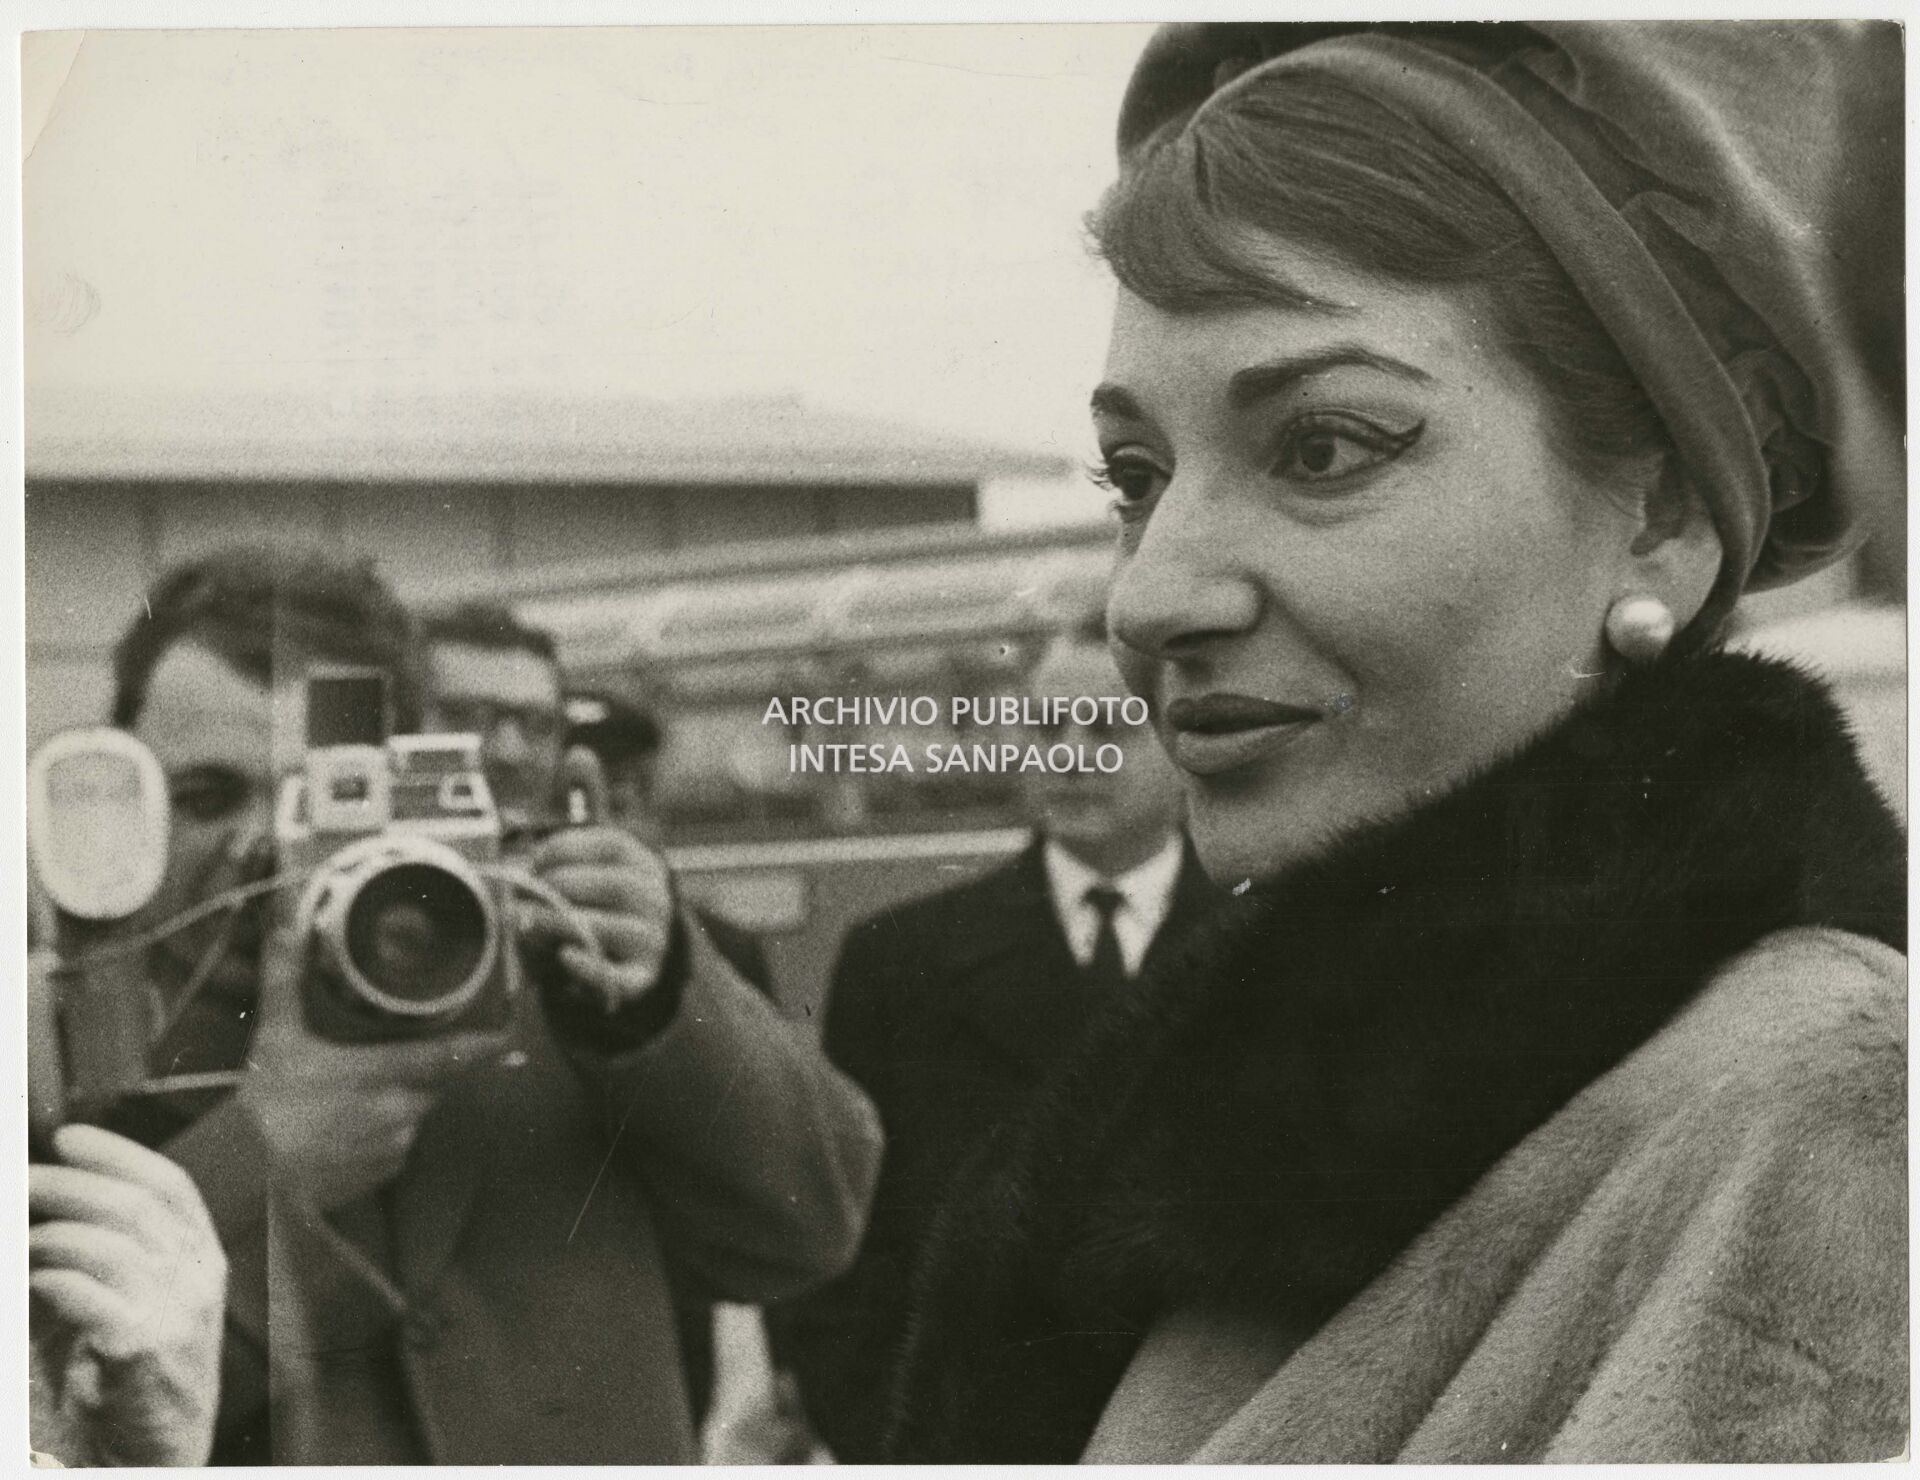 Maria Callas at Malpensa airport, just arrived from Los Angeles